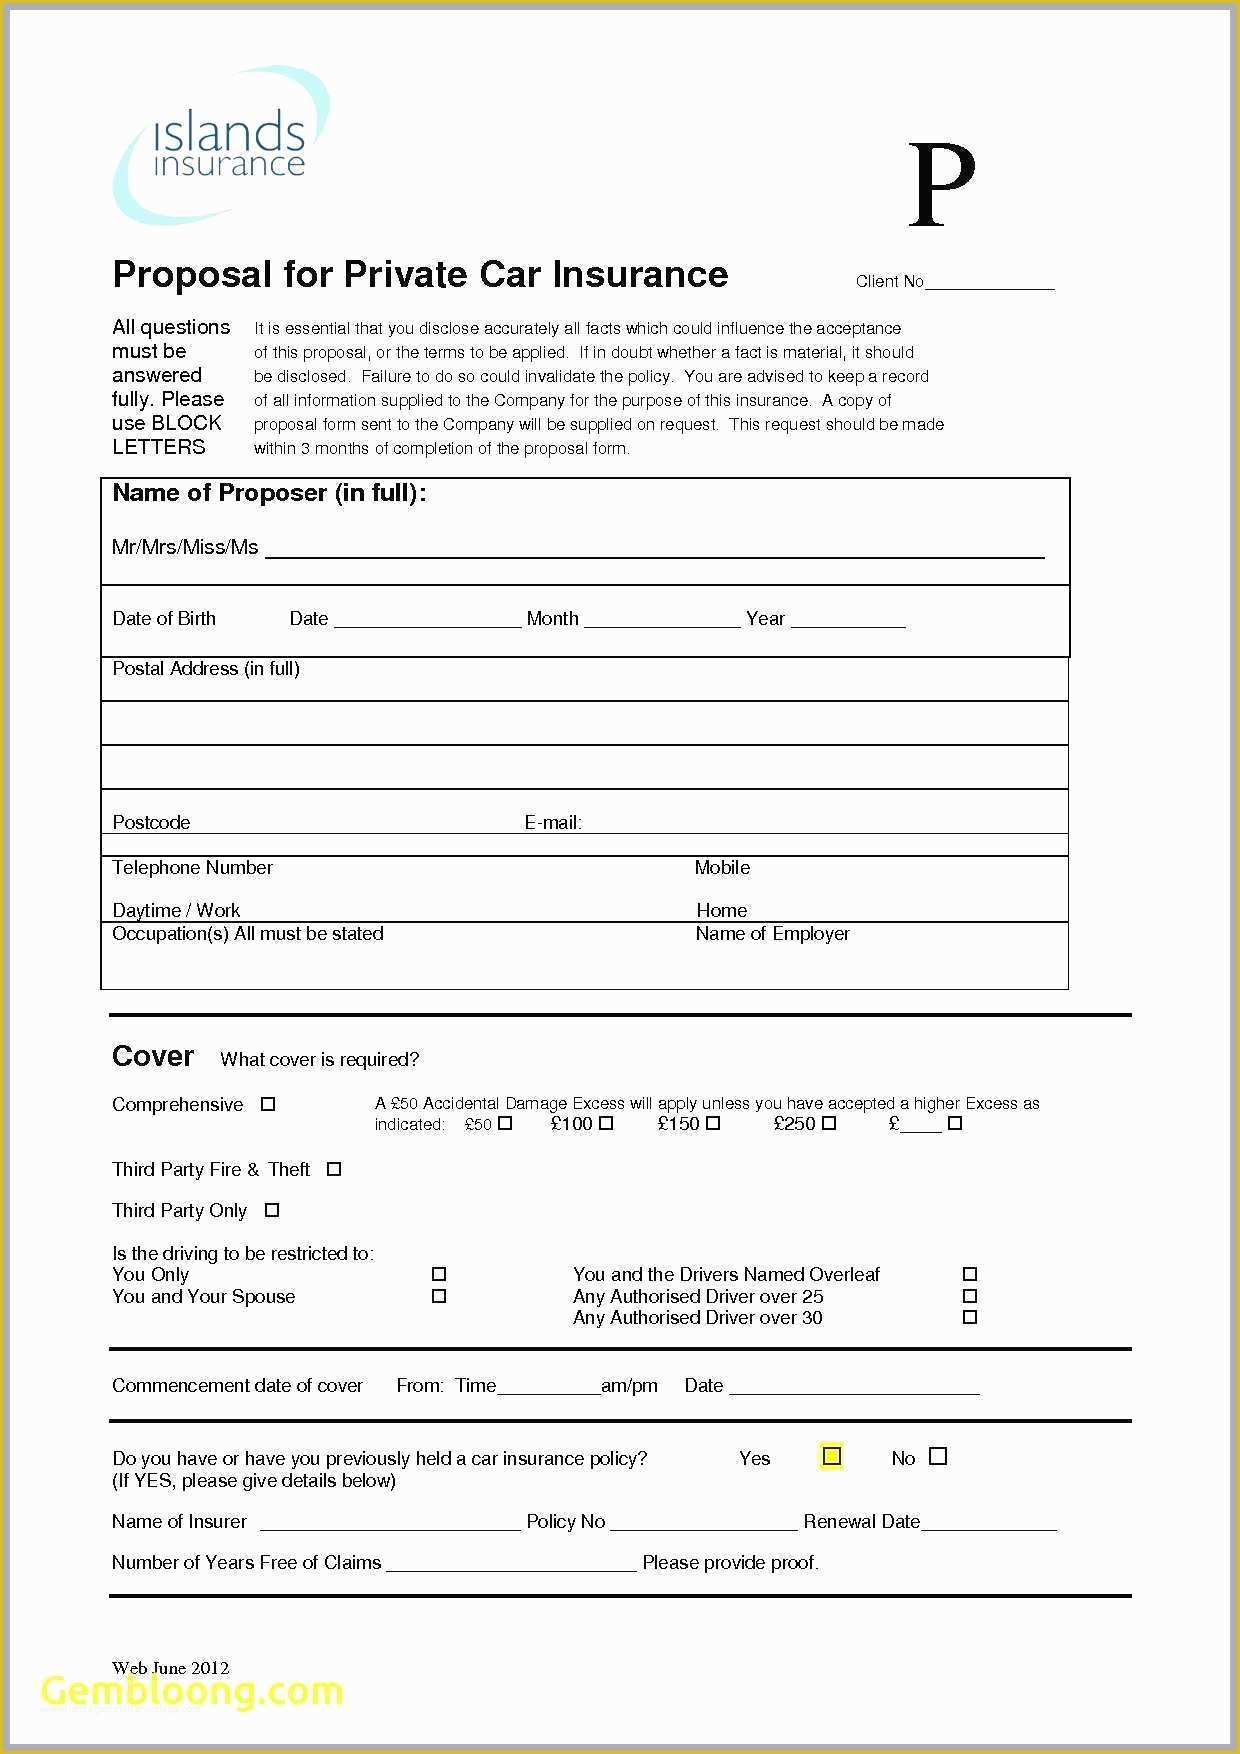 car insurance templates free download of car insurance templates free download of car insurance templates free download